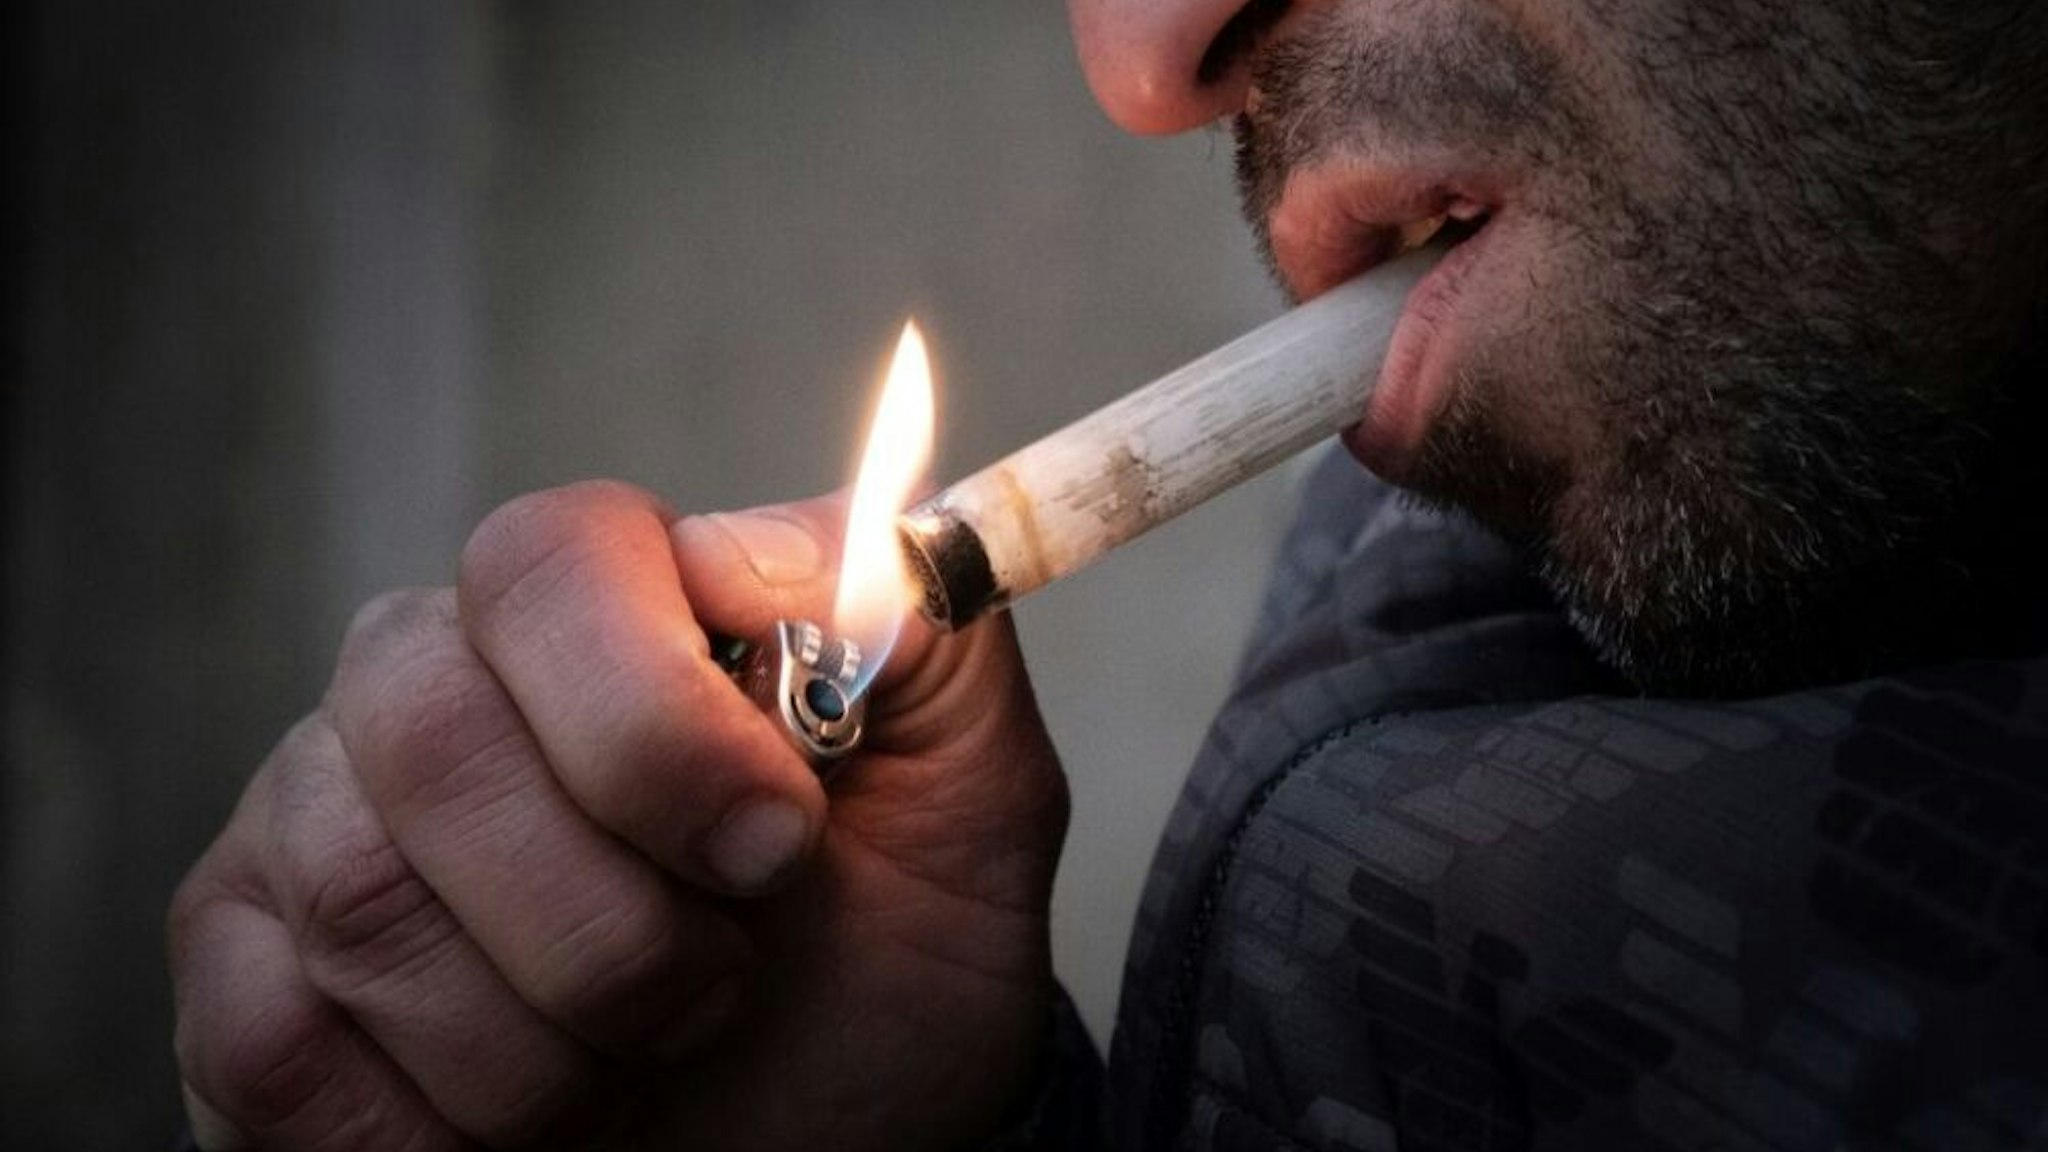 Oussman, a crack addict lights a pipe at Stalingrad Square, nicknamed Stalincrack, on December 2, 2020 in Paris. This "drug of the poor" has been wreaking havoc in the north-east of the capital for thirty years. Over the past 18 months, the authorities have been stepping up initiatives to try to curb the use of this smokable derivative of cocaine: reinforced police patrols, arrests of traffickers, accommodation for drug addicts but these efforts have so far been largely unsuccessful.